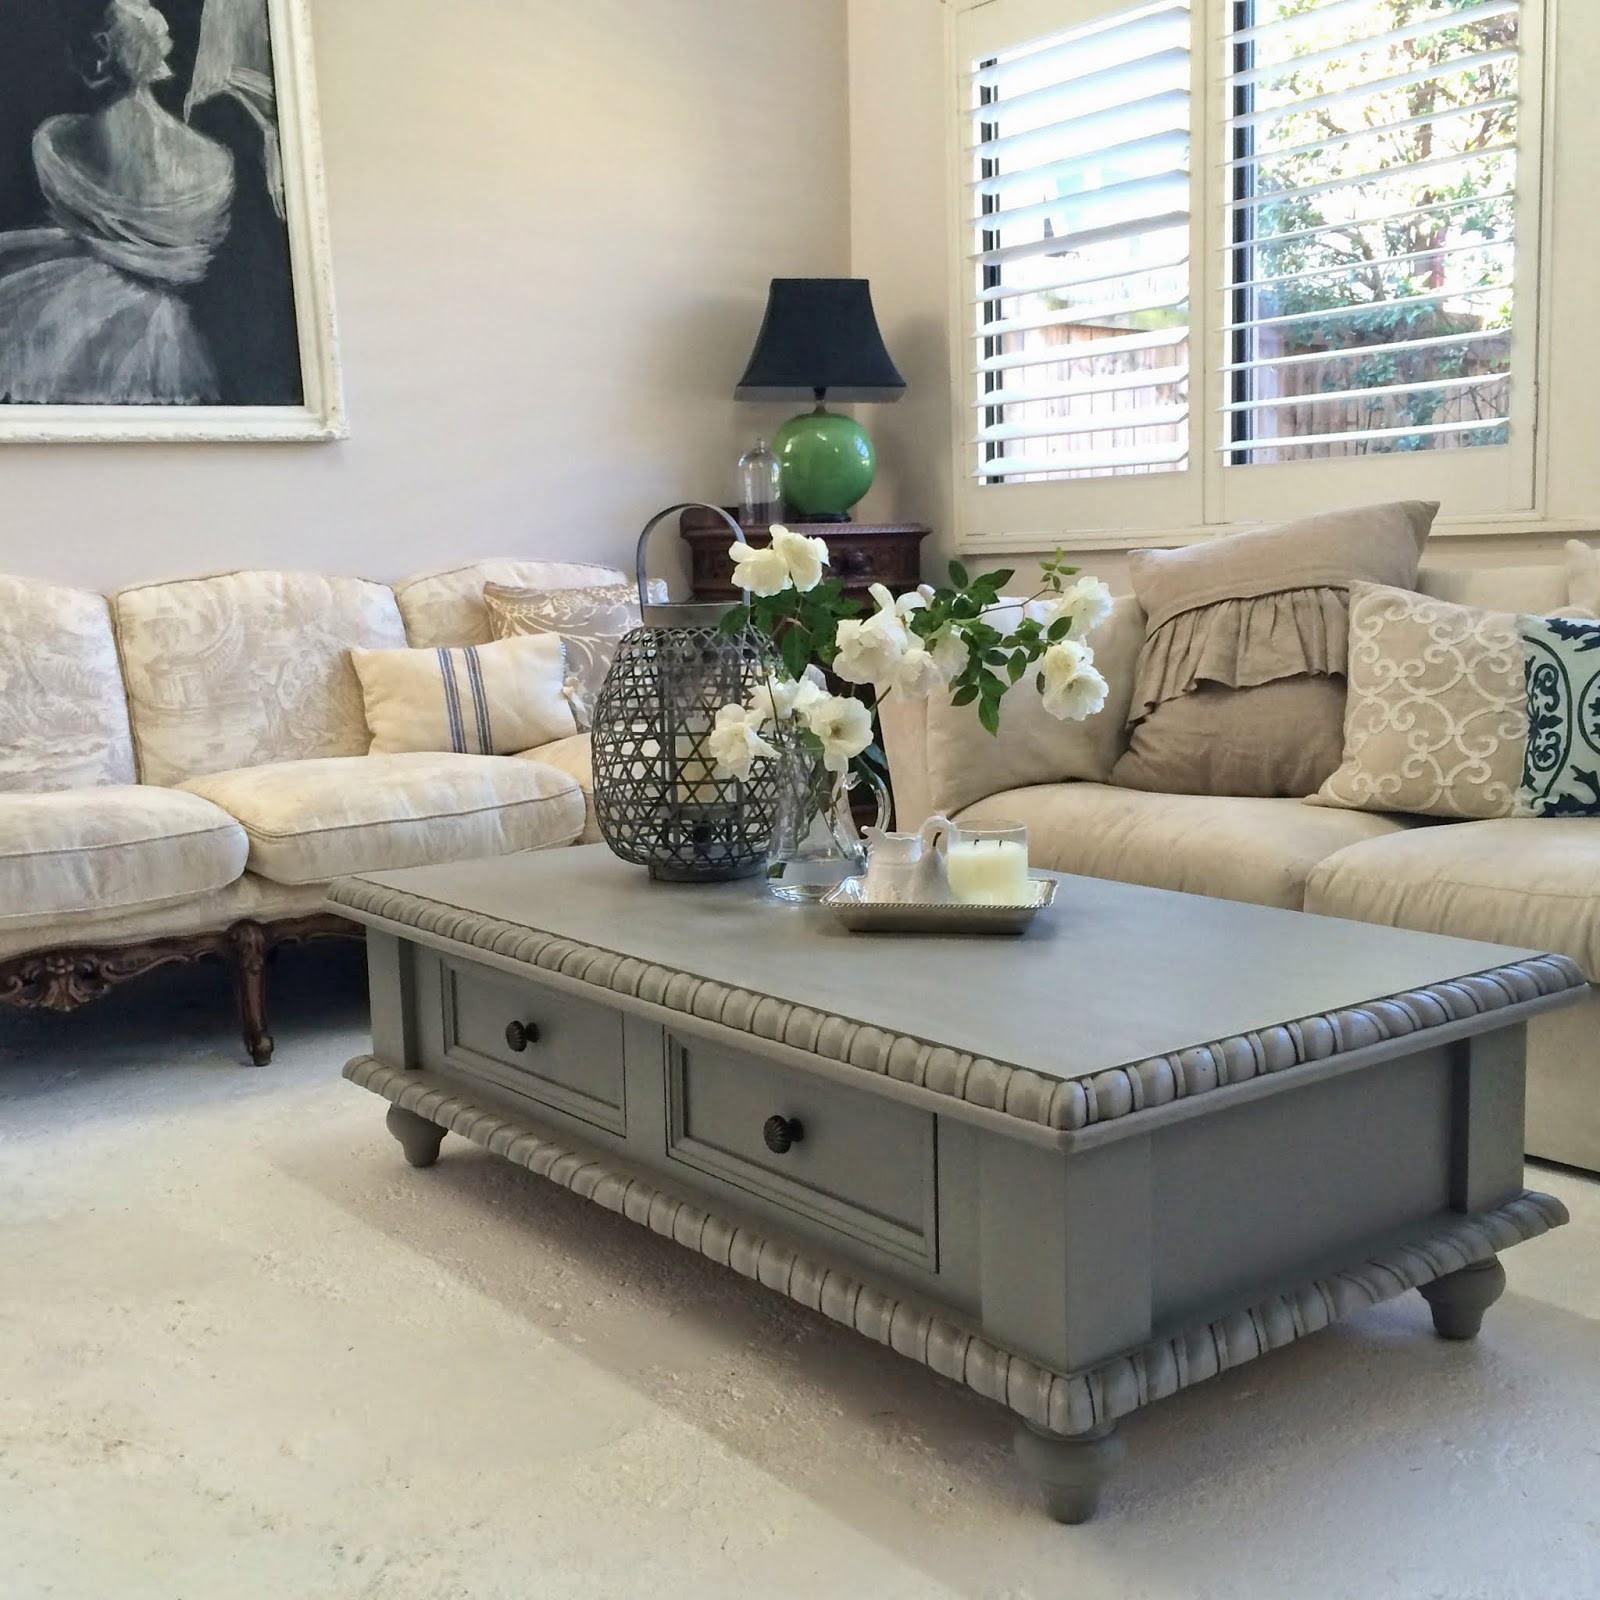 Living Room Center Table Decor
 Lilyfield Life Pine coffee table makeover